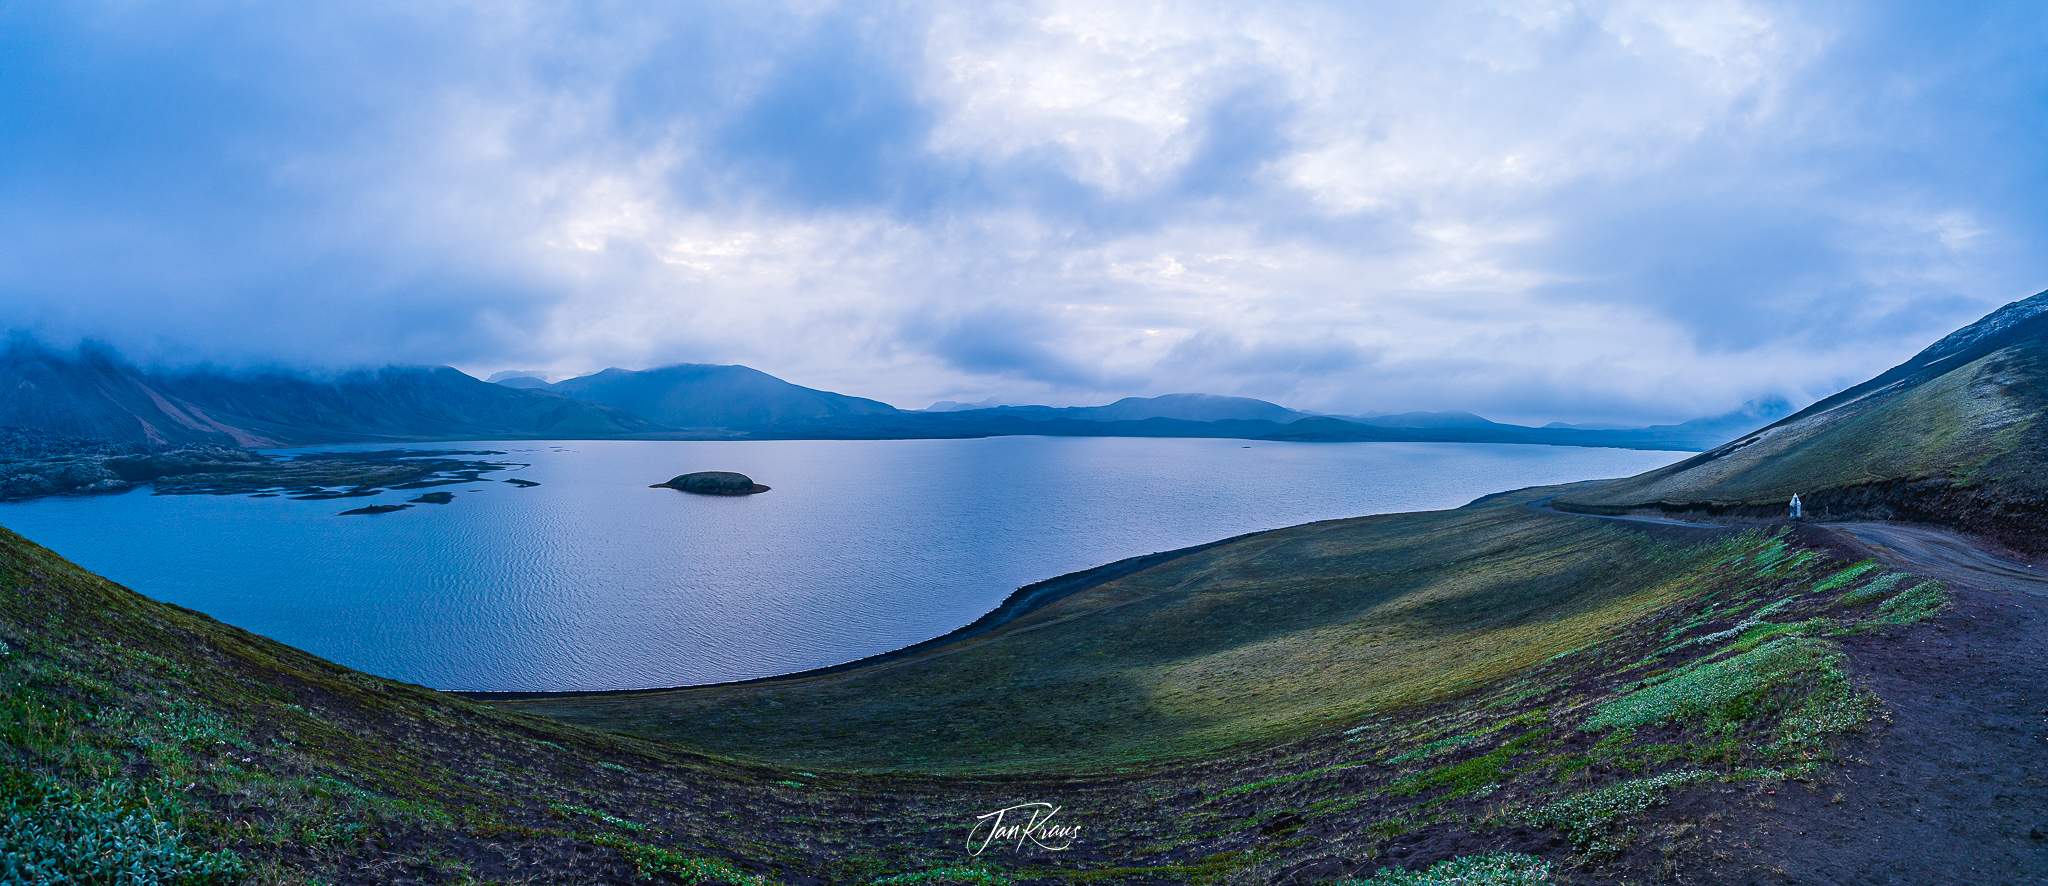 A view over Frostastaðavatn lake, seen from the viewpoint along F-208 road, Iceland